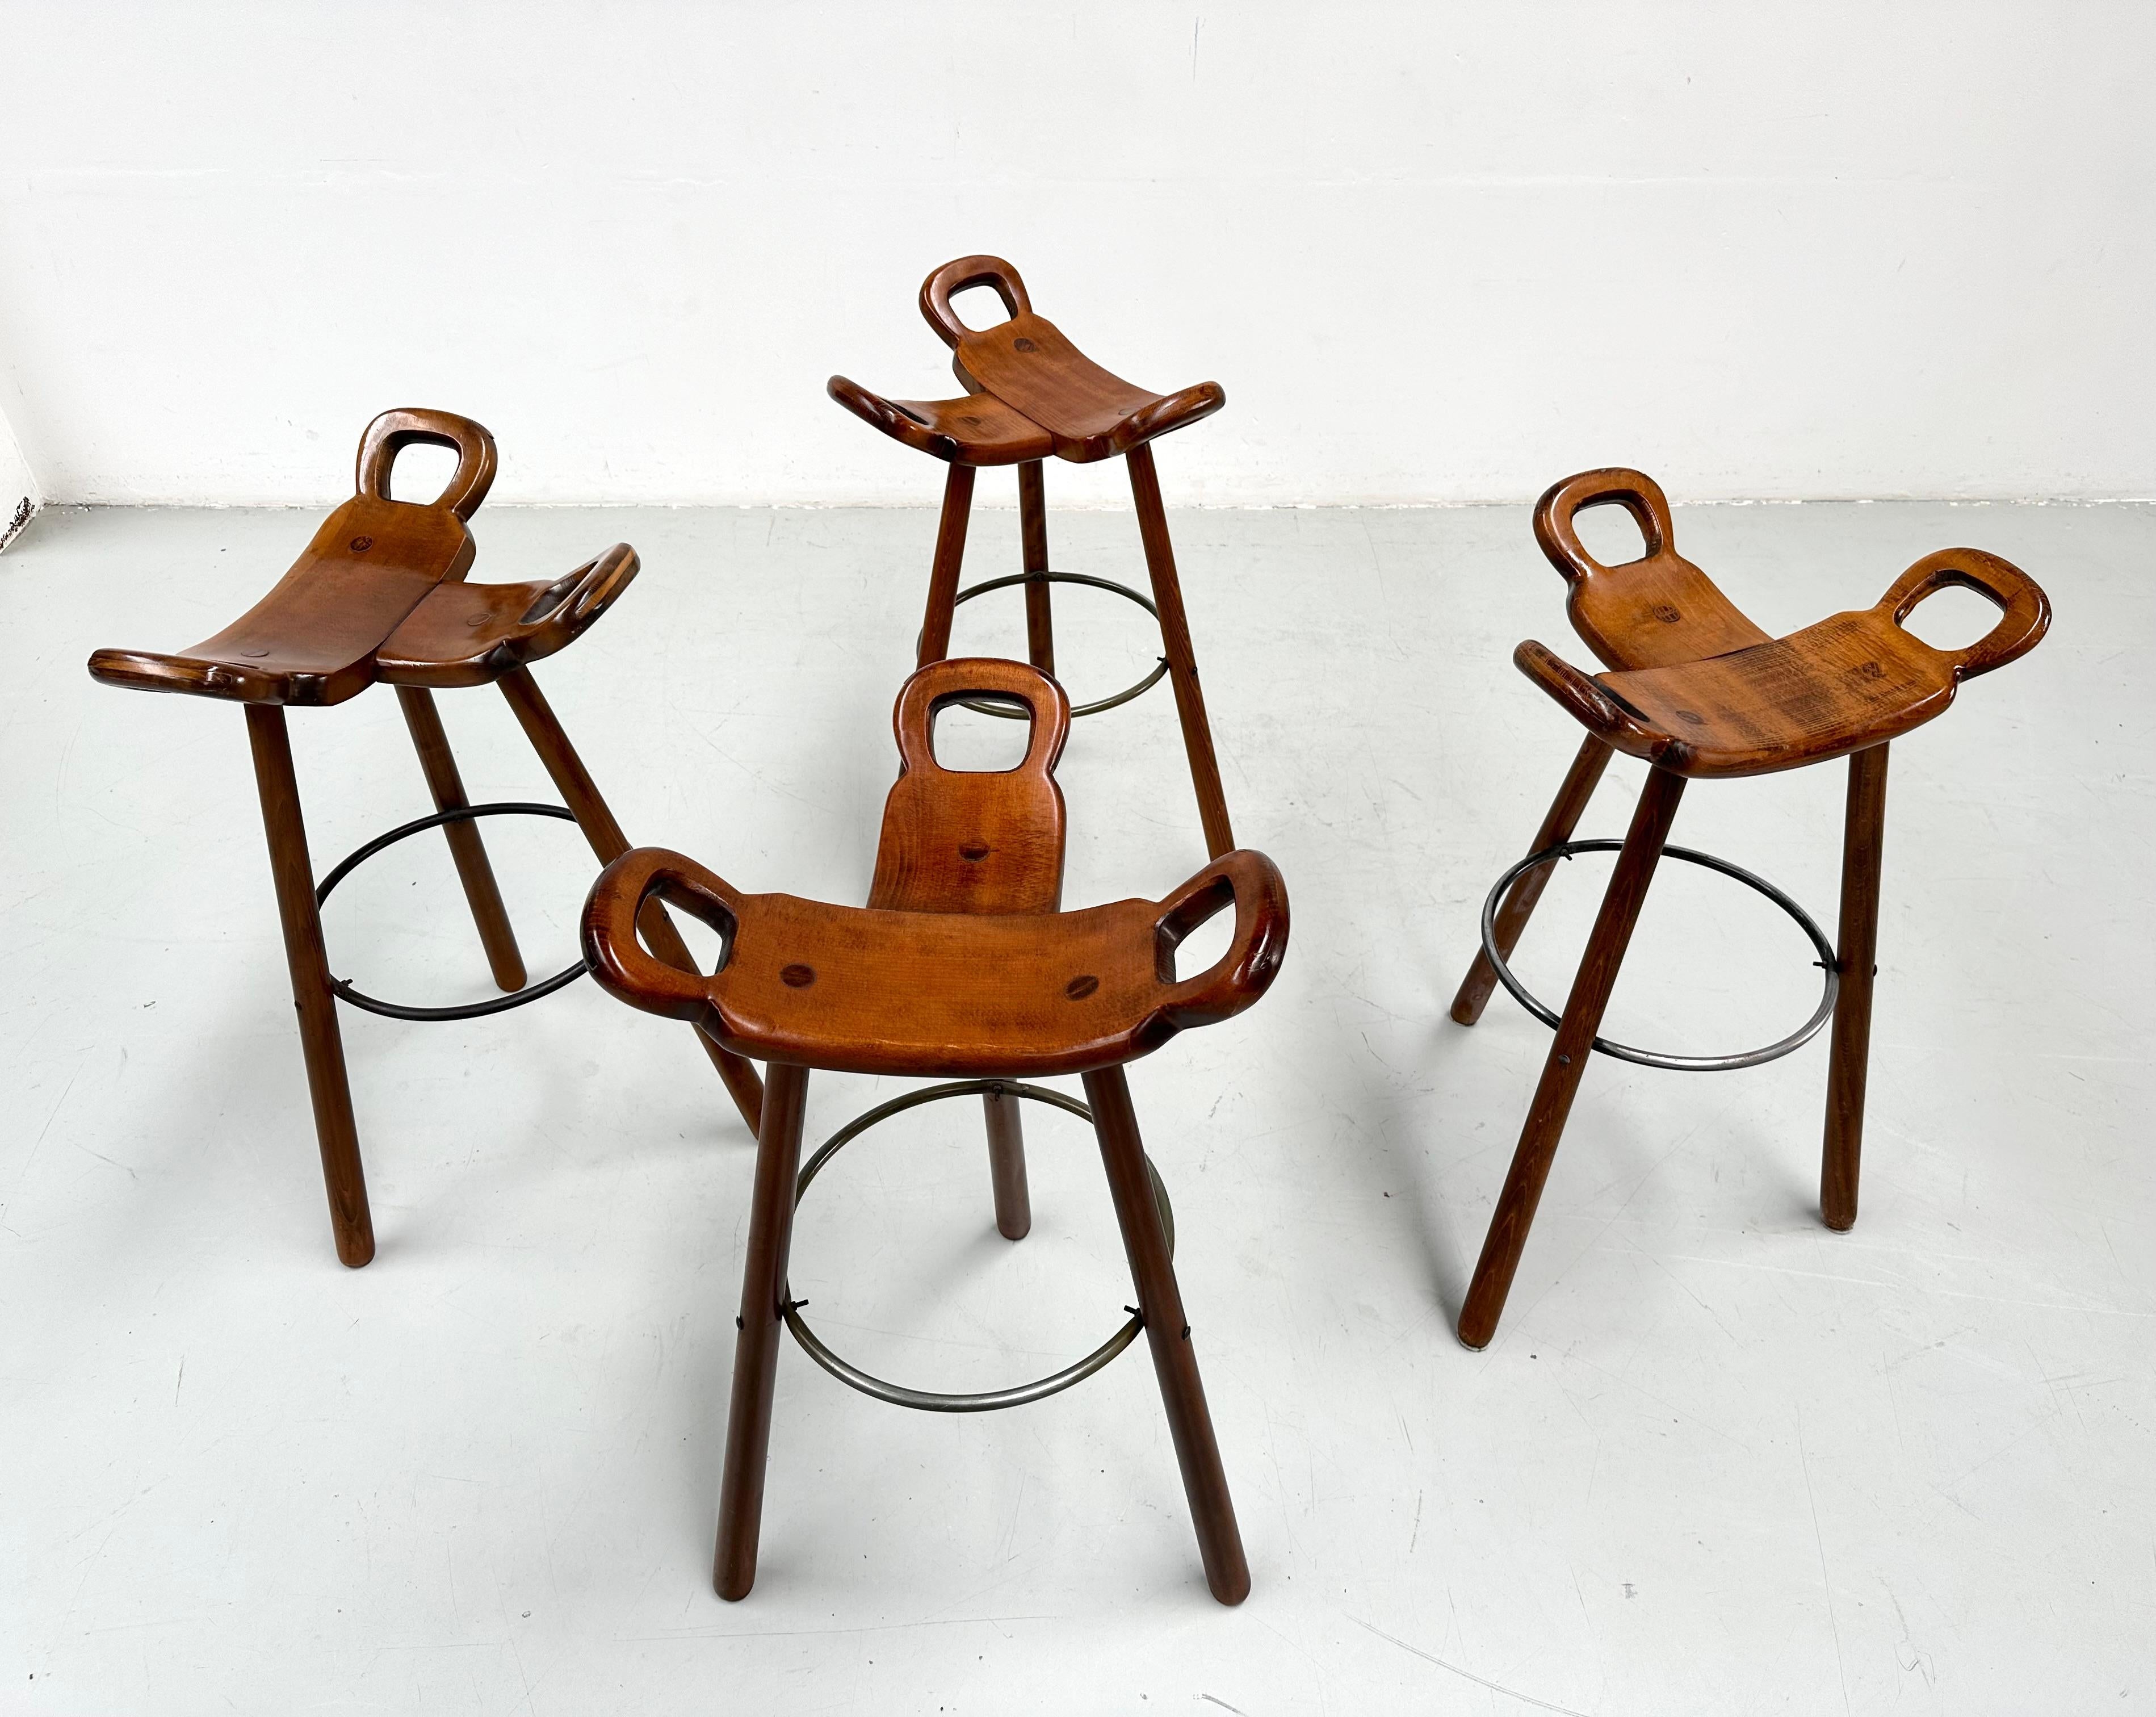 Set of 4 Marbella Brutalist Stools by Sergio Rodrigues for Confonorm 1970s. 12